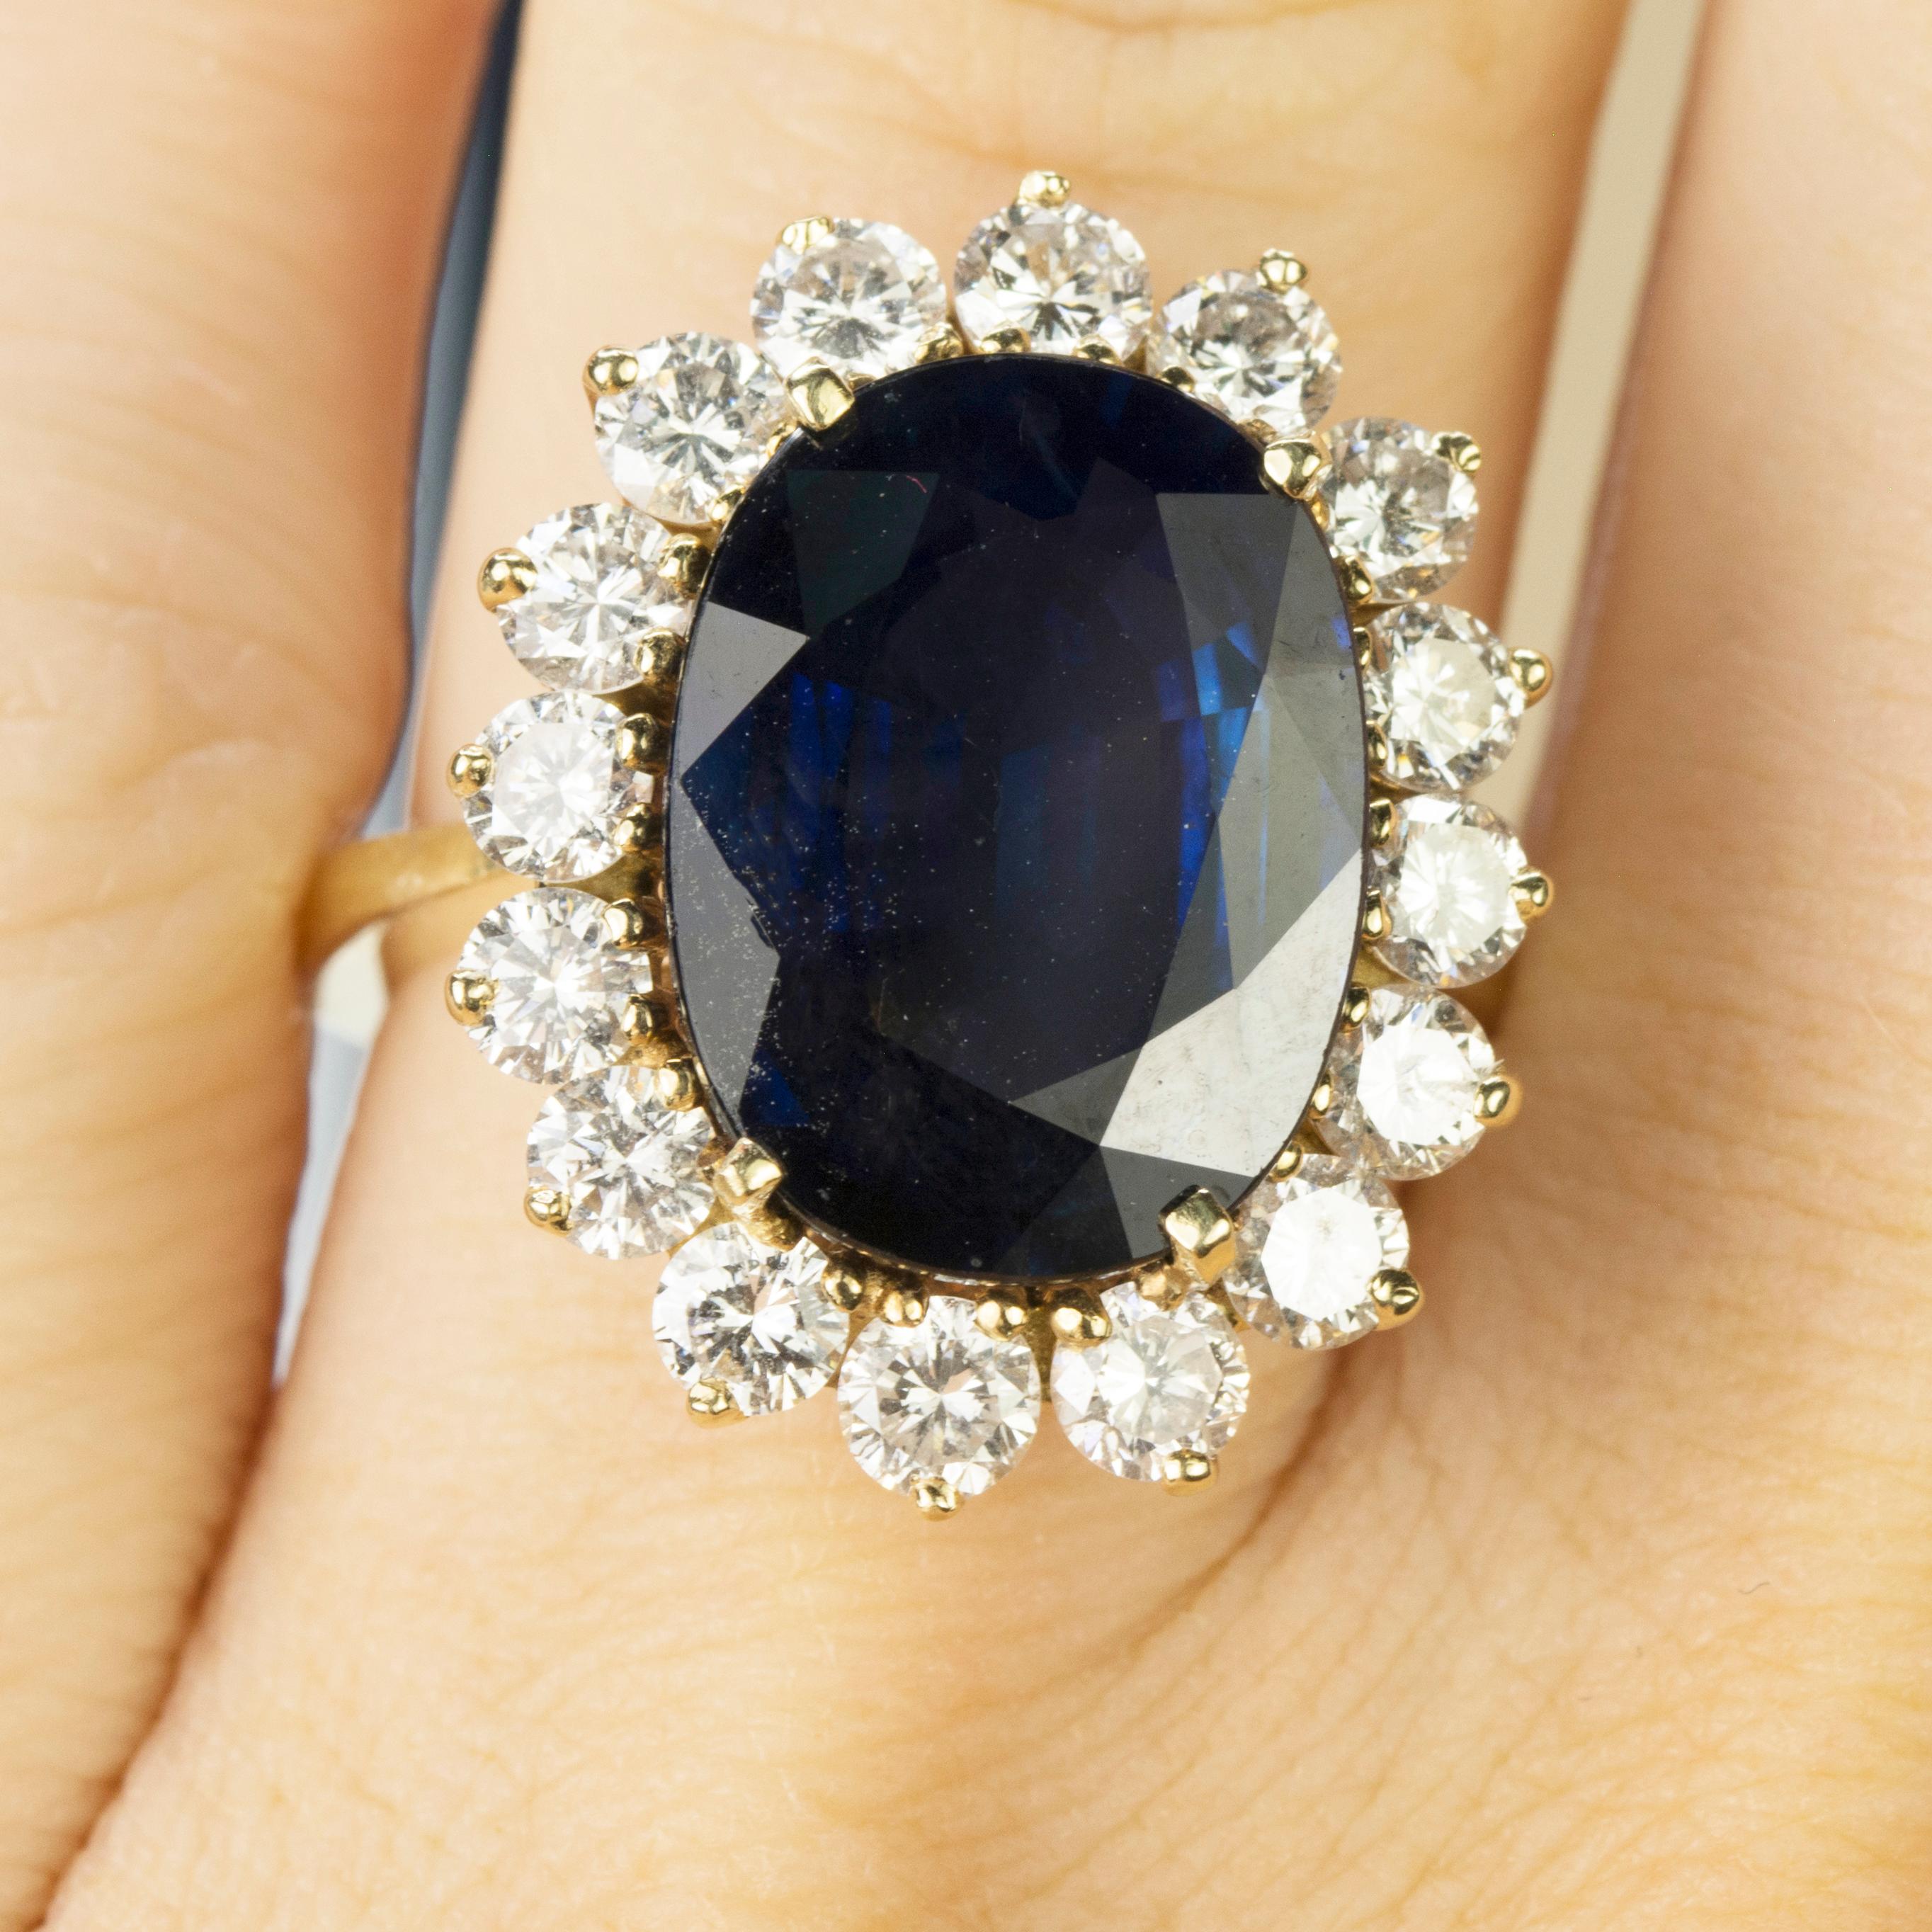 14k Ring with AGL certified 8.86 carat oval blue sapphire and 16 round diamonds weighing approximately 2.40 carats. 7.42g